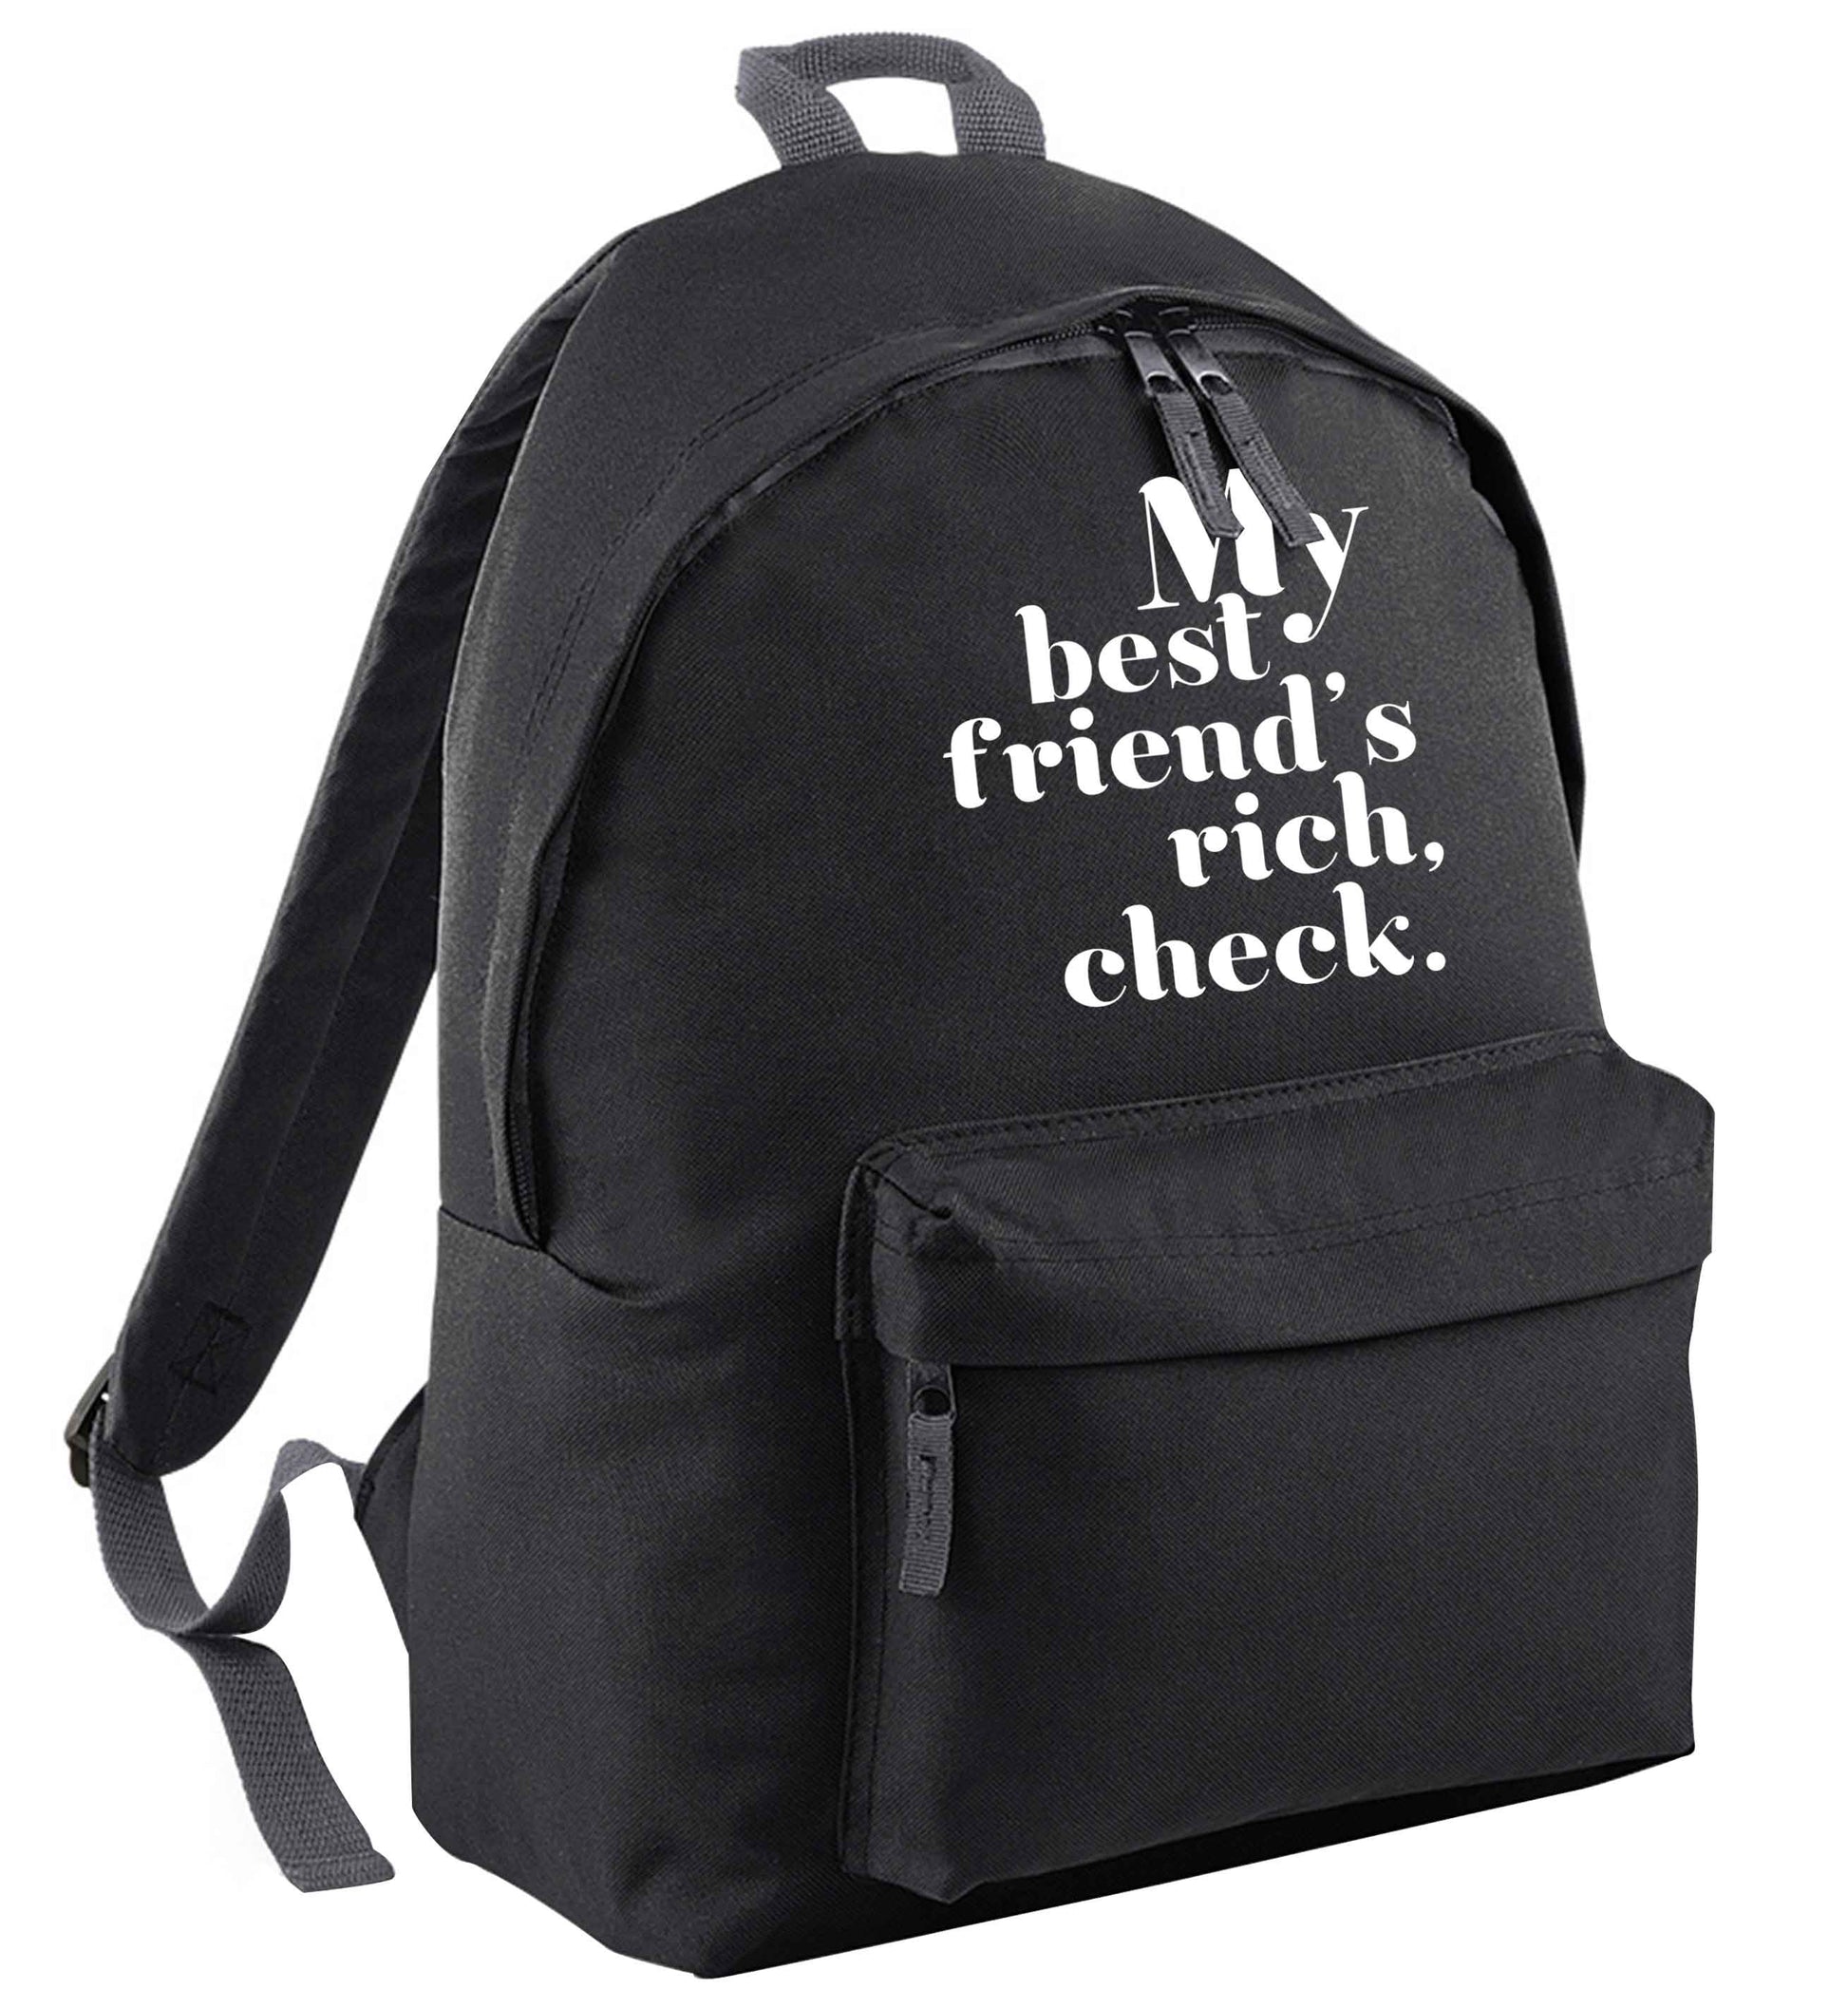 Got a rich best friend? Why not ask them to get you this, just let us  know and we'll tripple the price ;)  black adults backpack